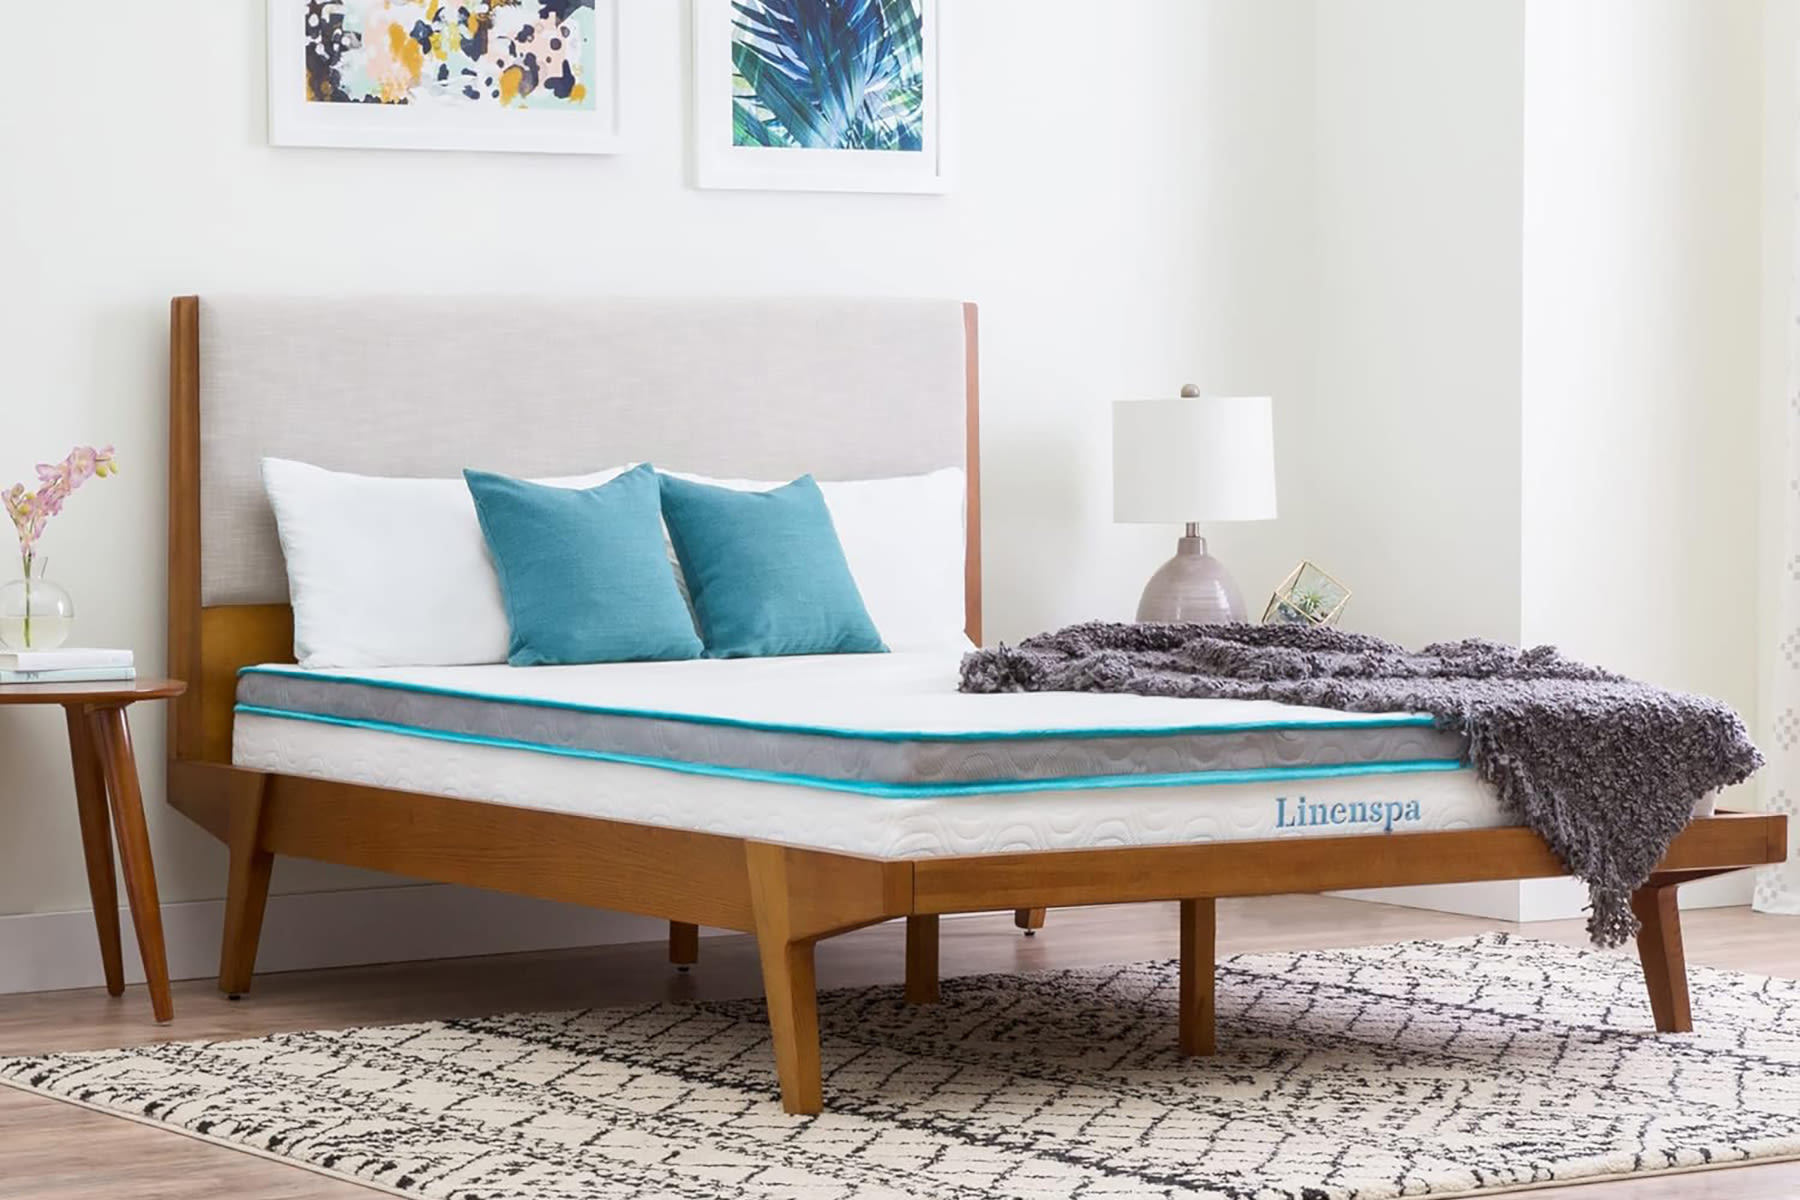 These Are the Best Mattresses to Shop on Amazon Right Now, From Hybrid to Memory Foam Options